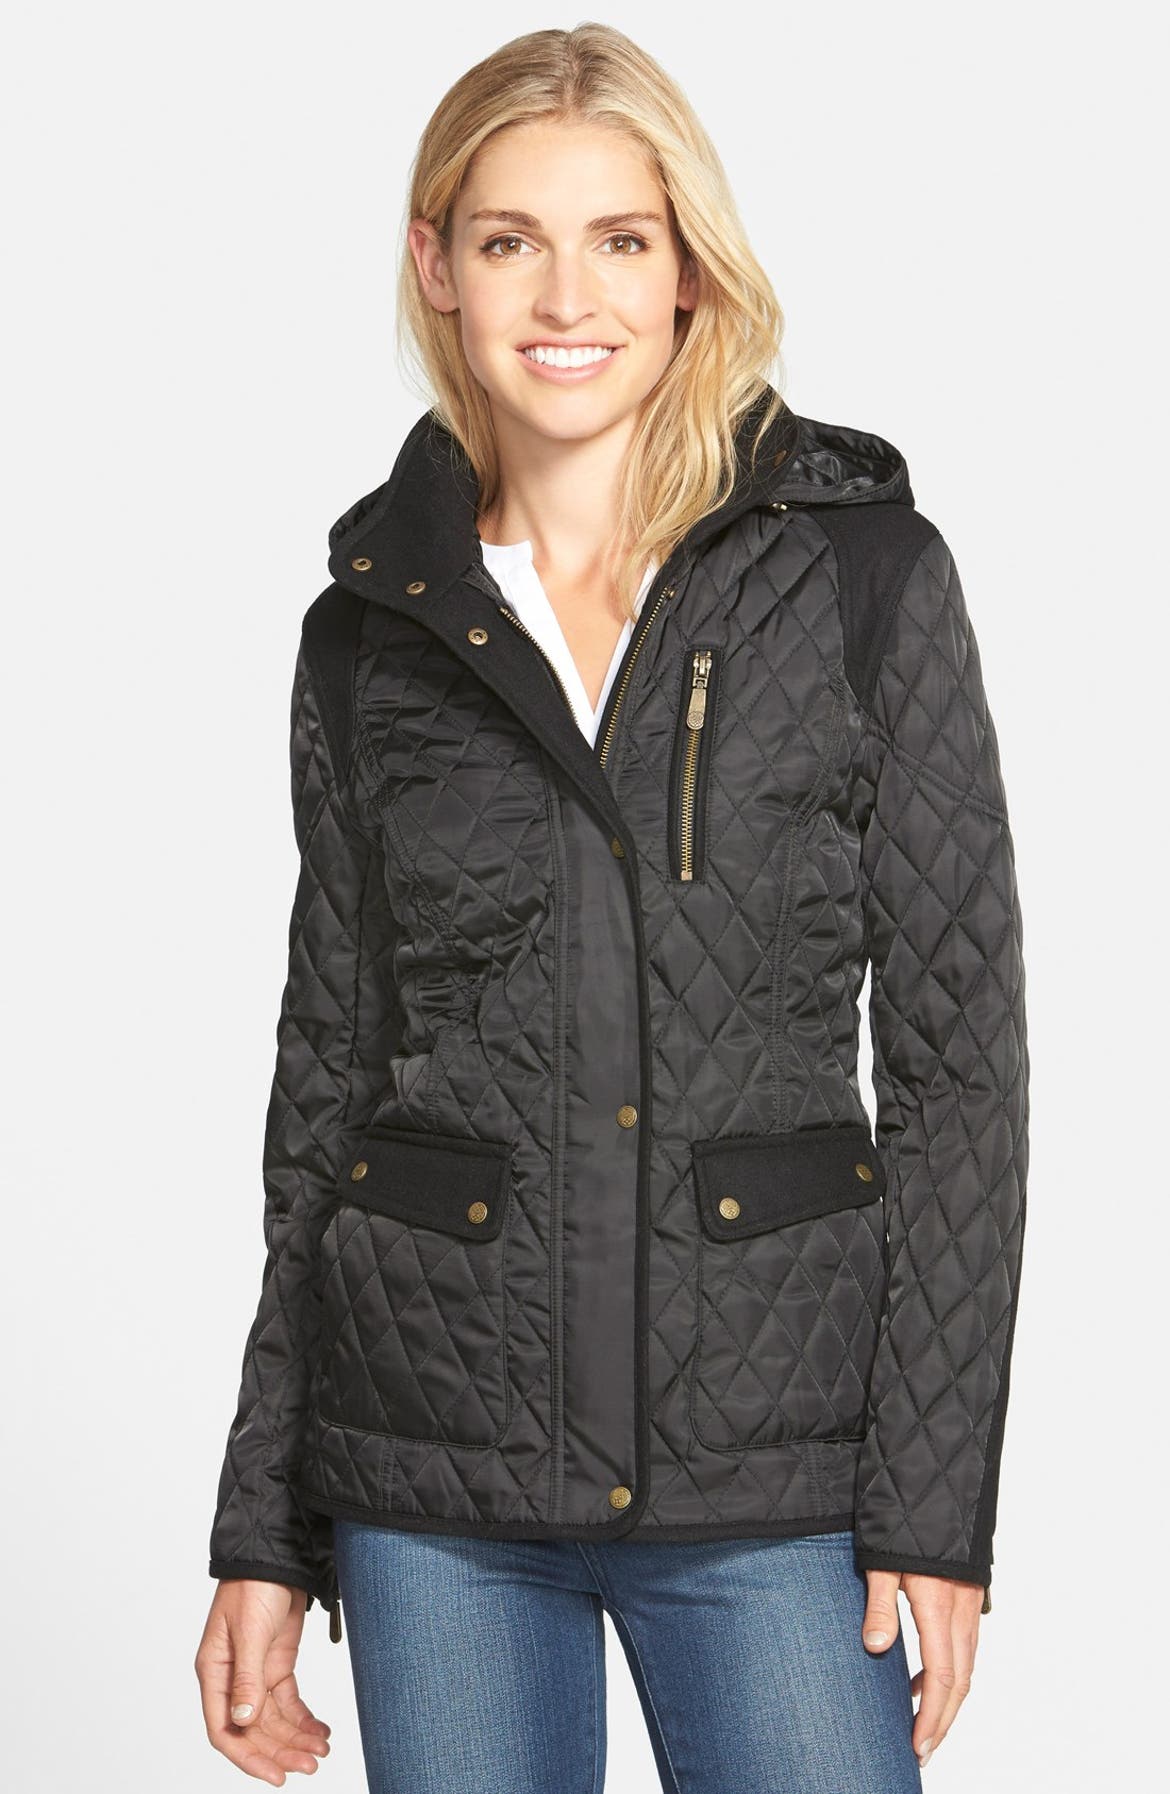 Vince Camuto Mixed Media Quilted Jacket with Detachable Hood | Nordstrom